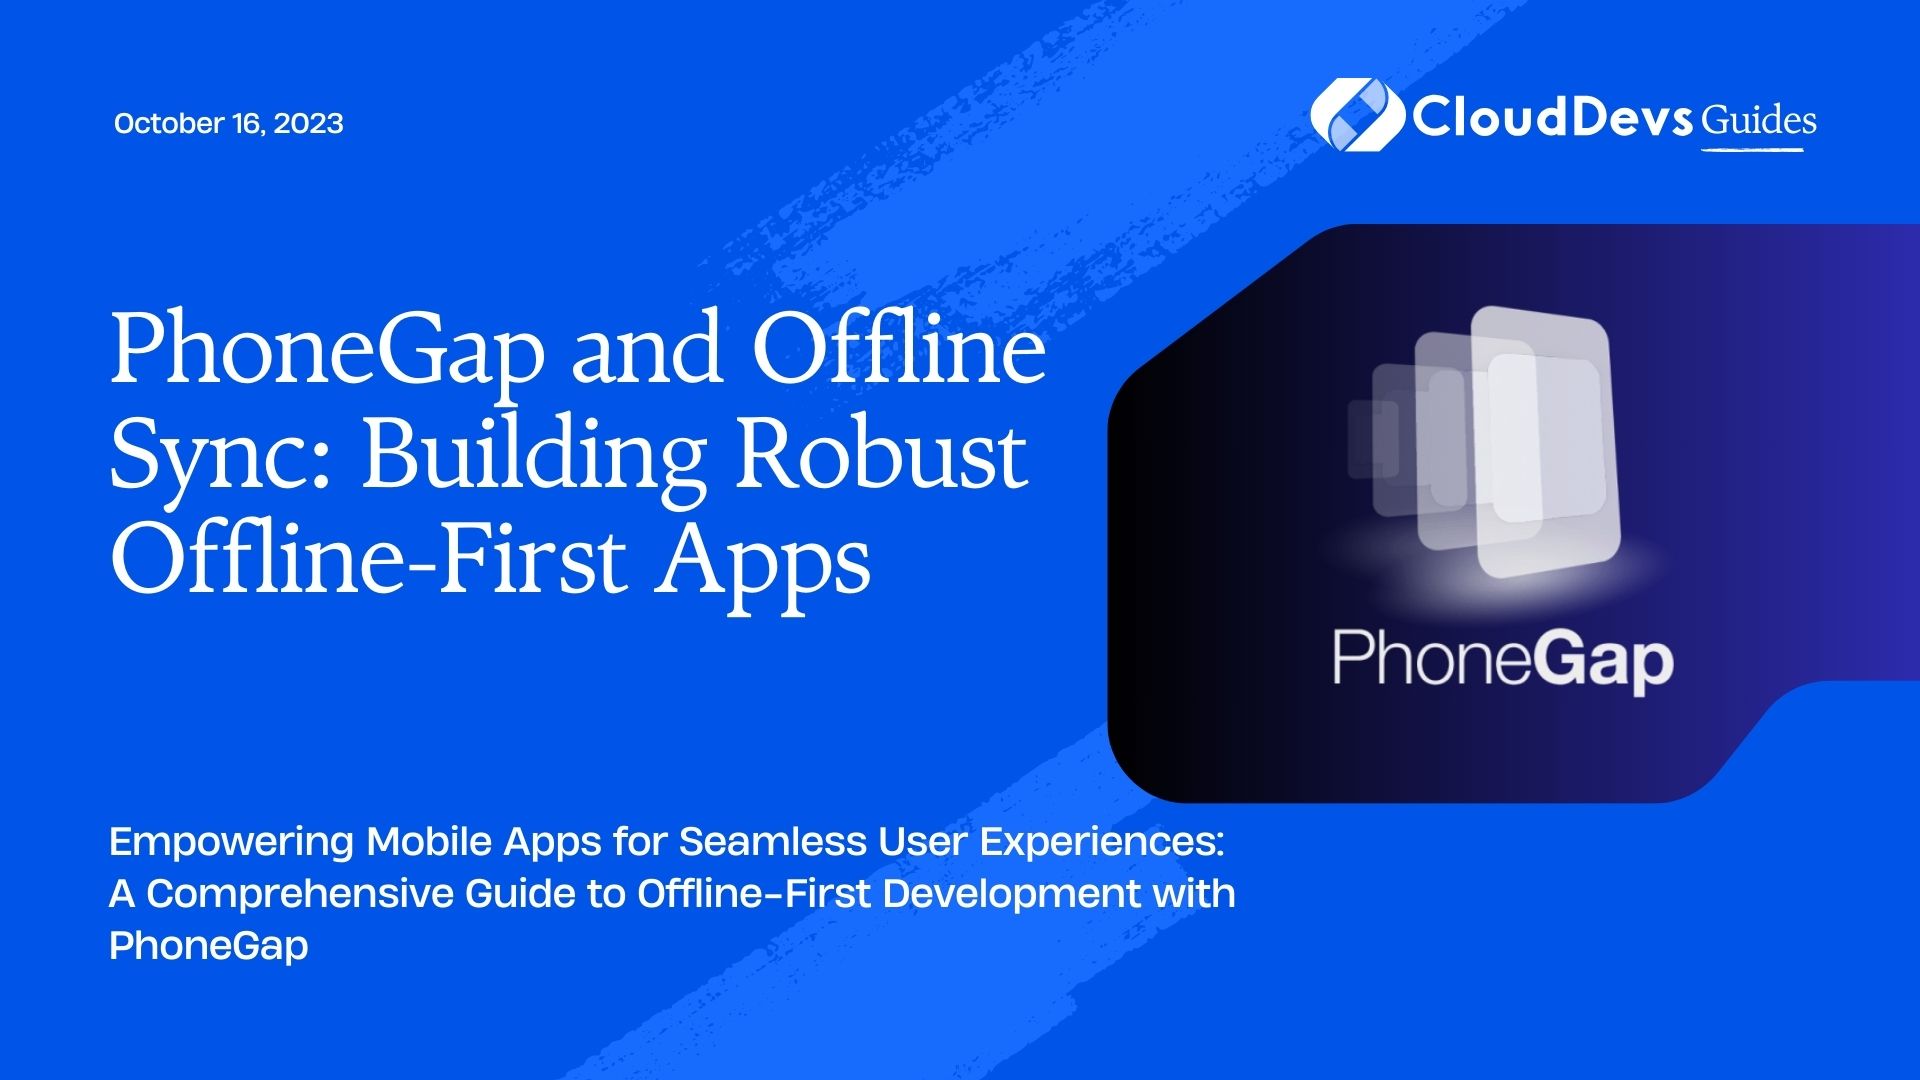 PhoneGap and Offline Sync: Building Robust Offline-First Apps